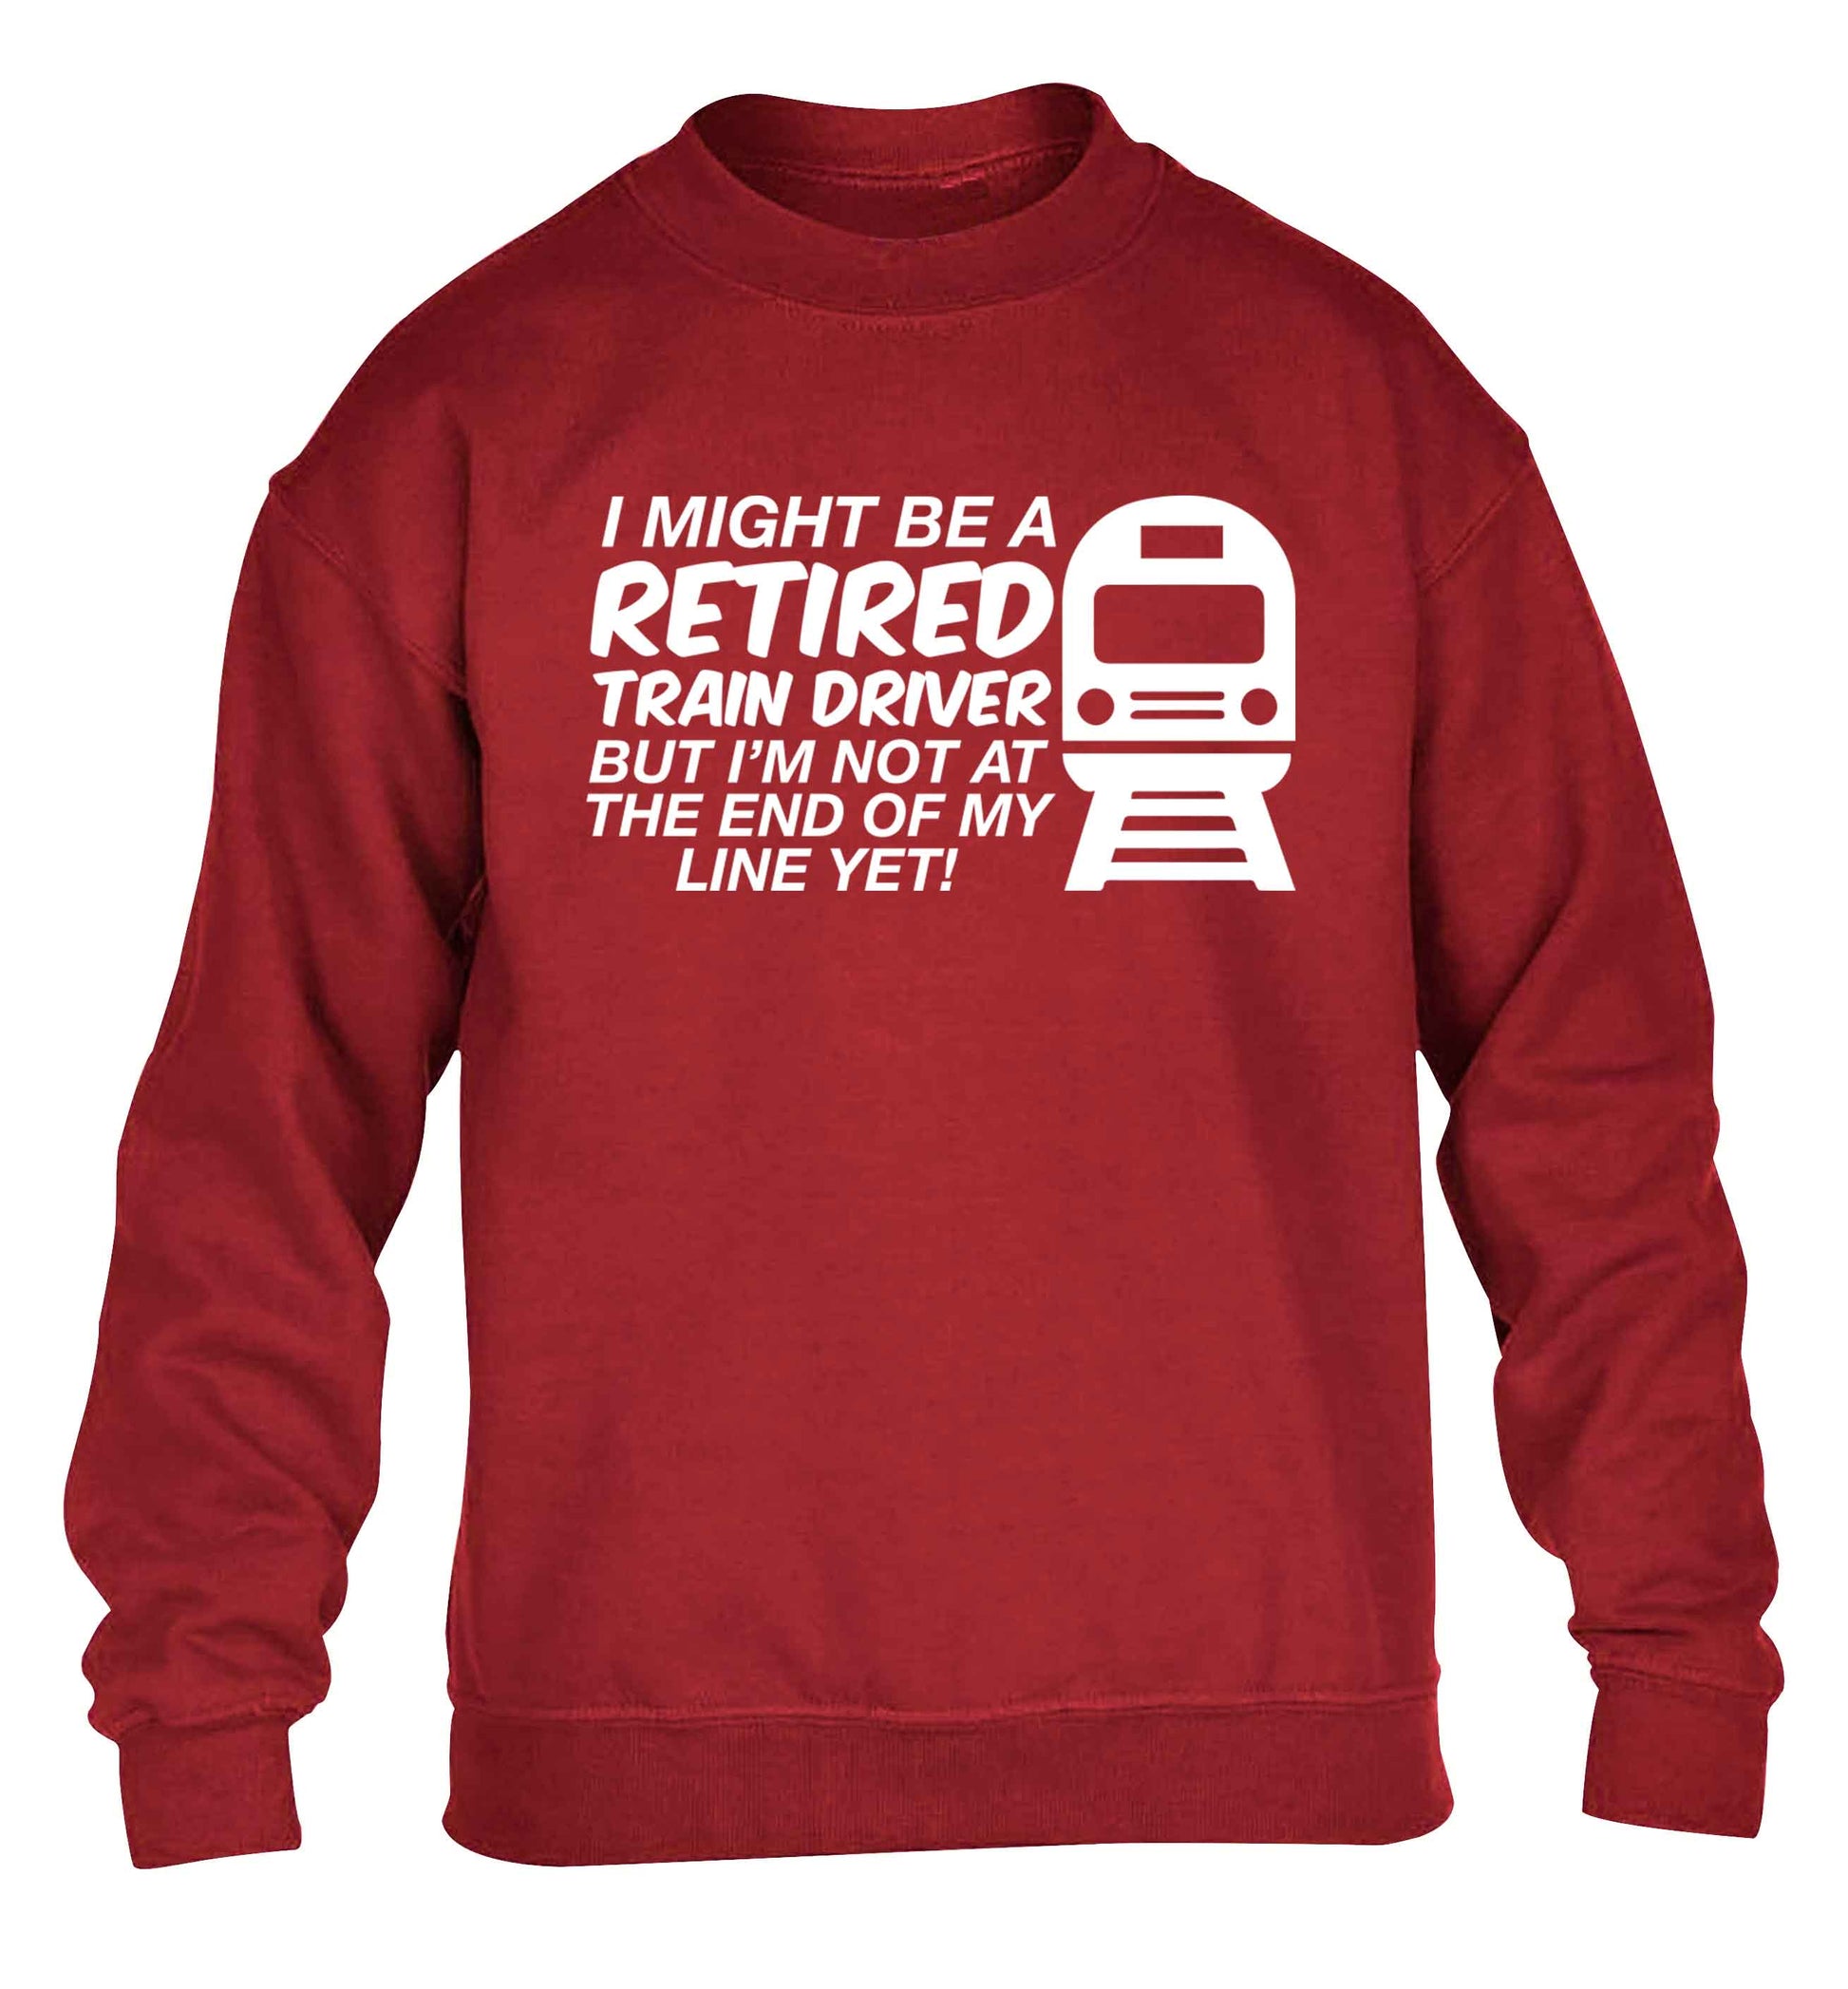 Retired train driver but I'm not at the end of my line yet children's grey sweater 12-13 Years